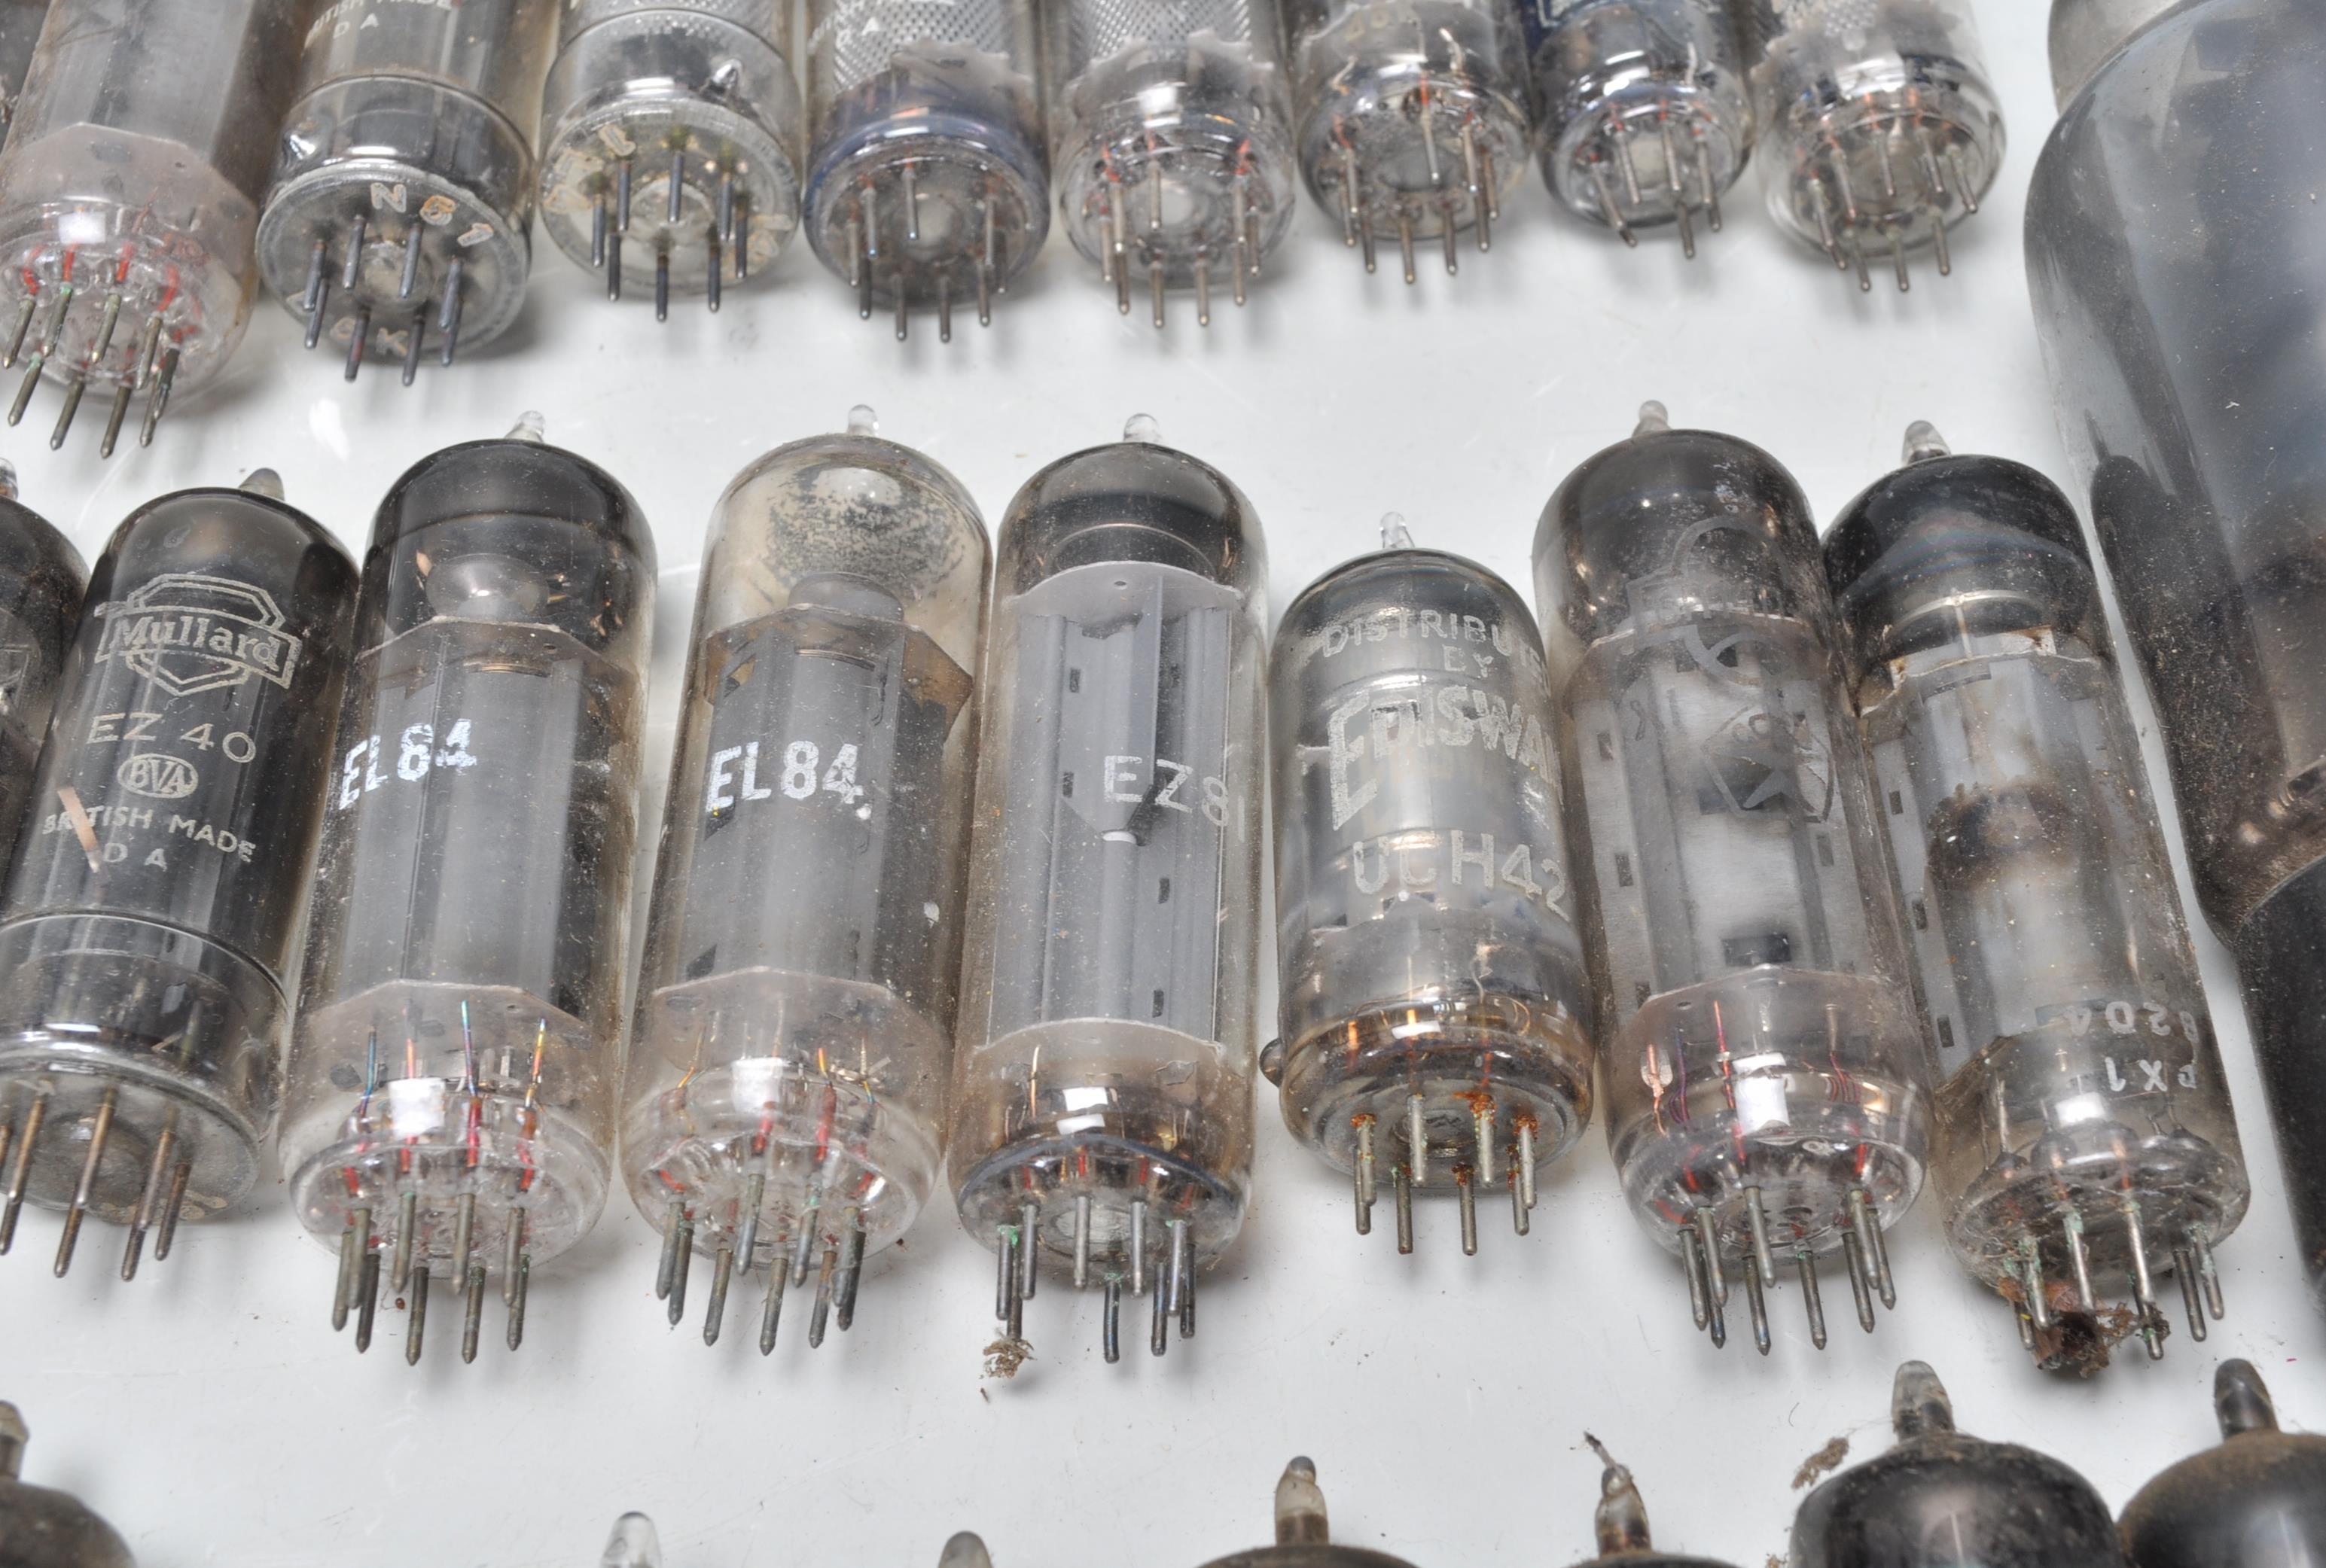 A collection of vintage mixed radio valves to include EC83, EZ81, Ediswate UCH42, Mullard EZ81 - Image 13 of 21